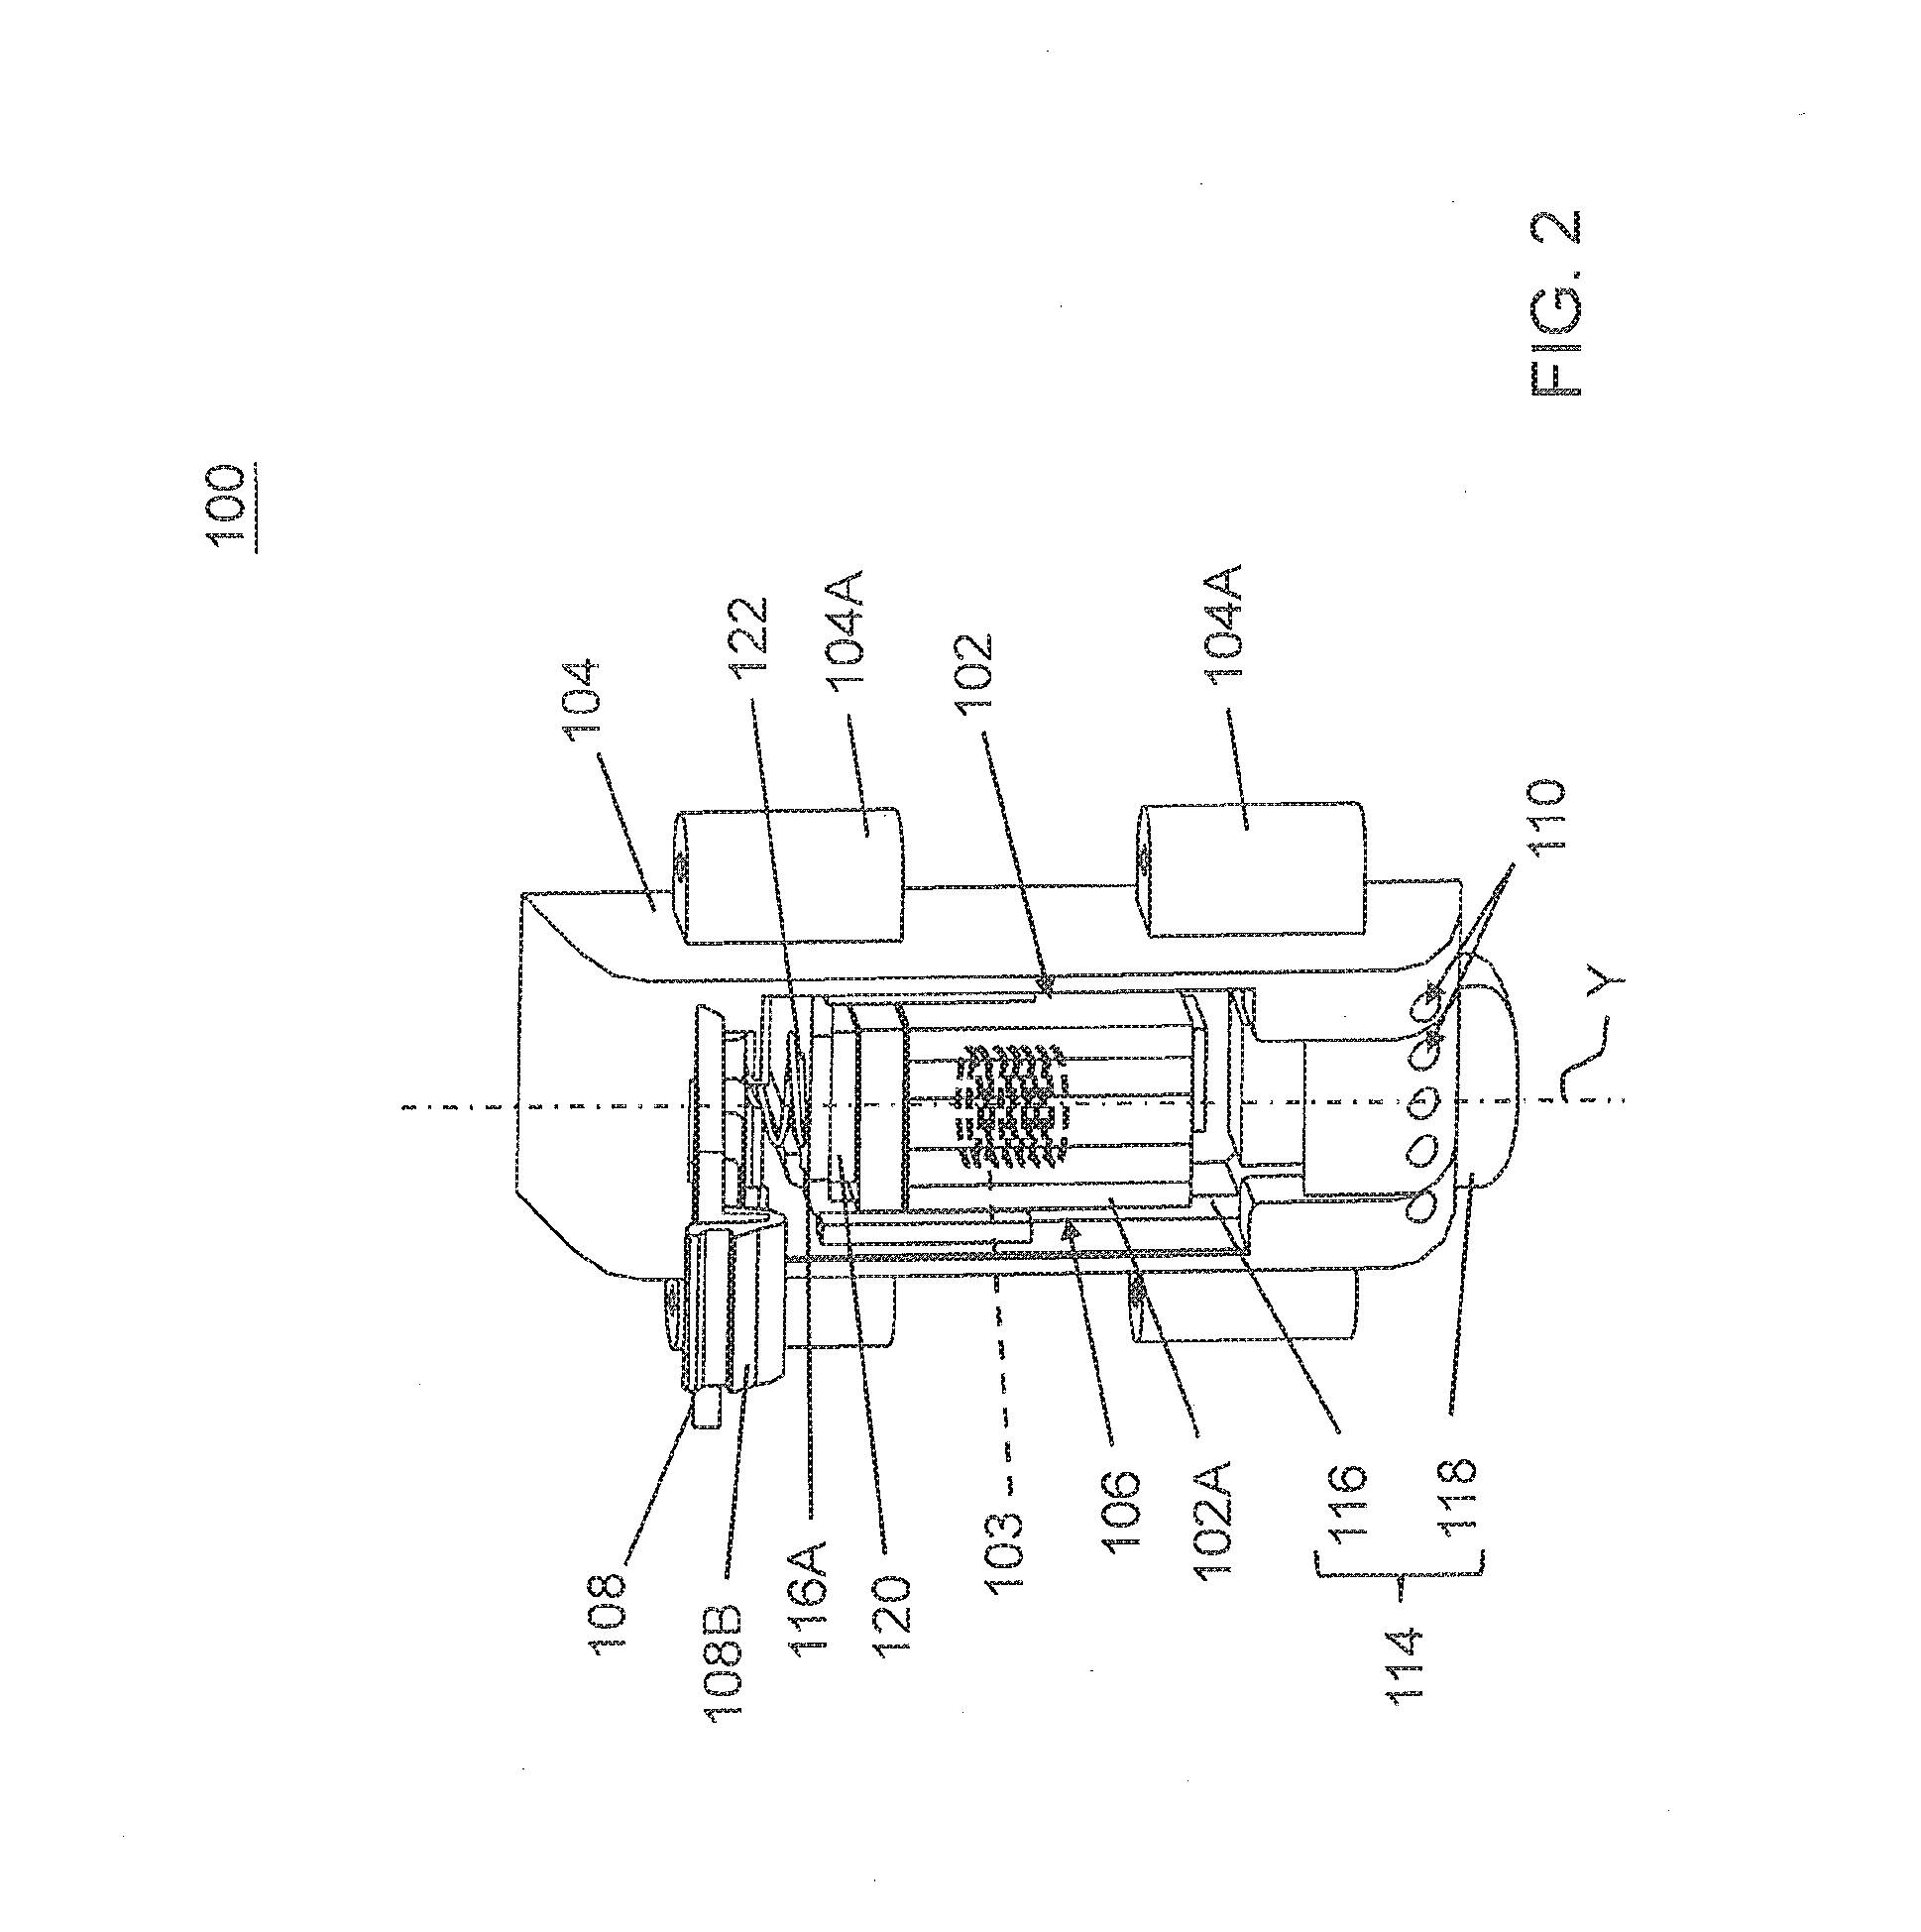 System and Method of Applying a Massage and Emitting an Aromatic Scent